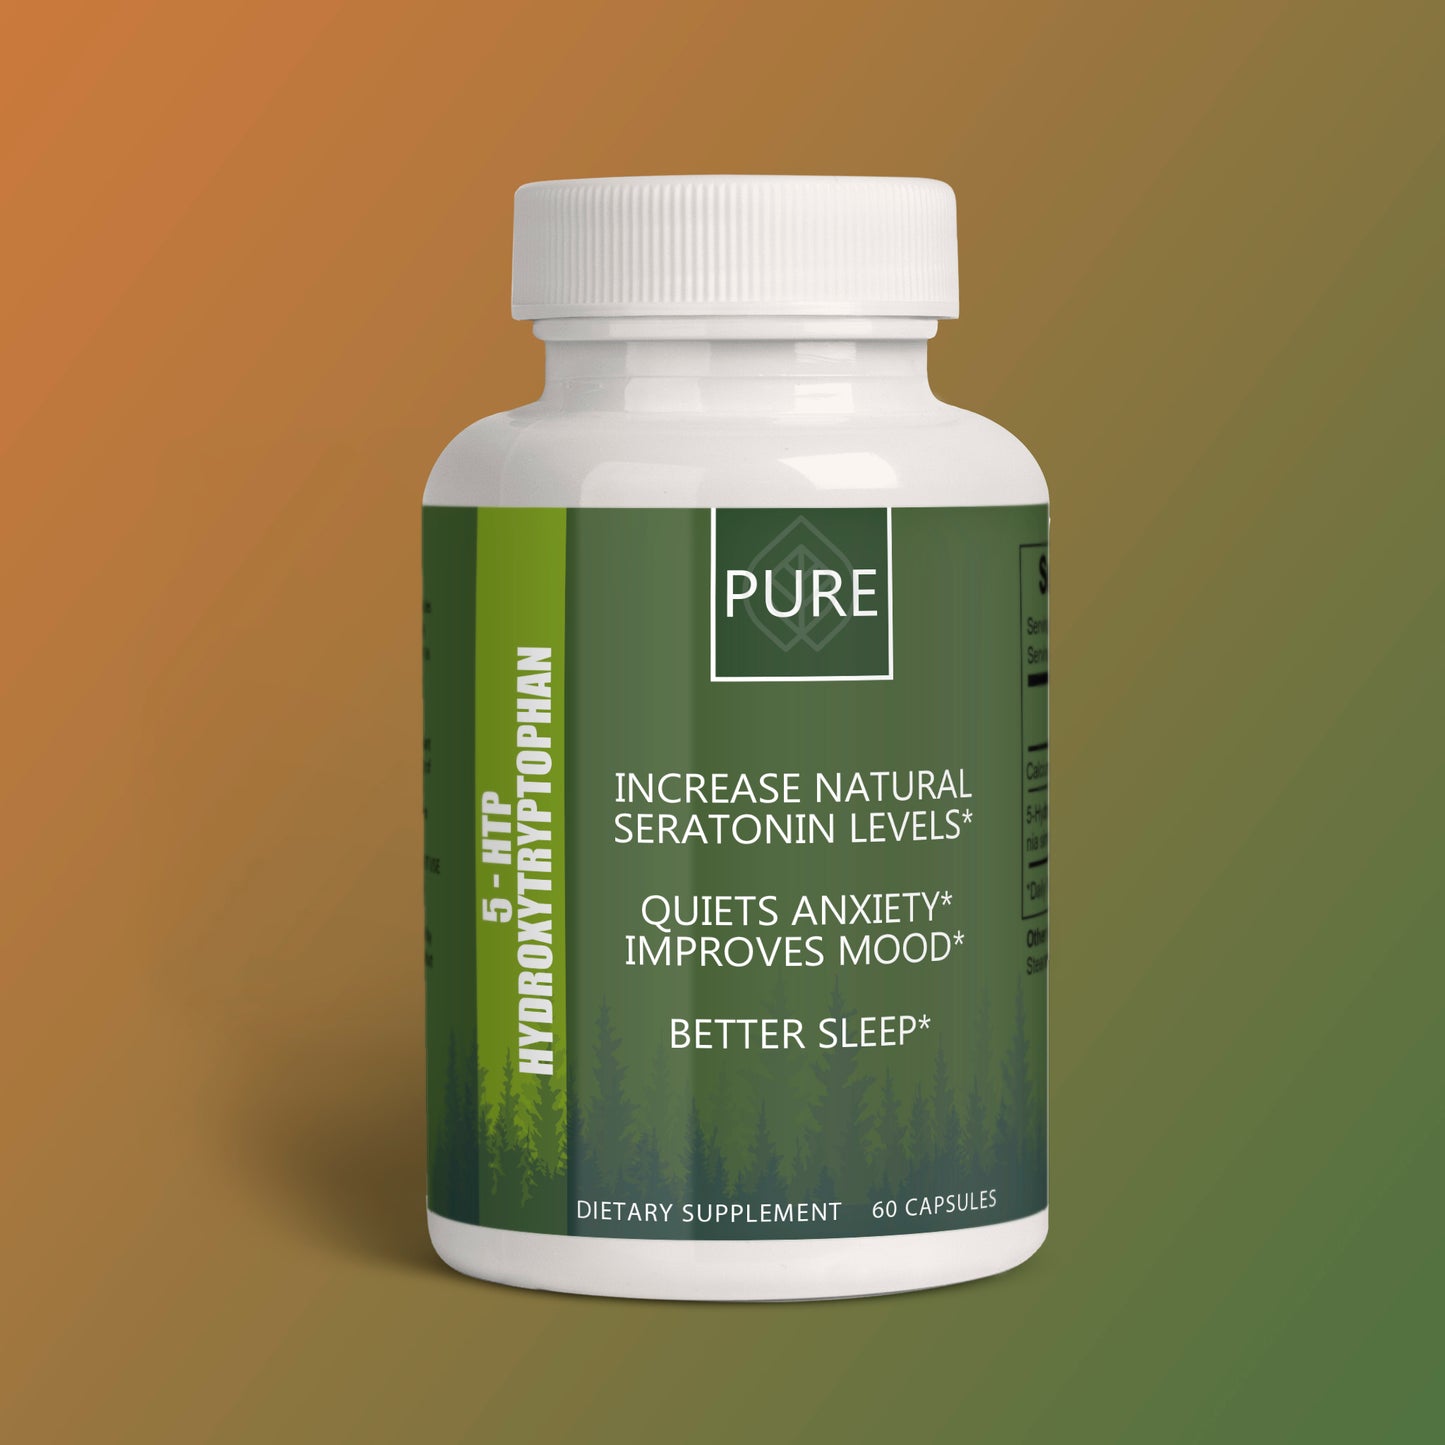 PURE. 5-HTP - Improves Sleep and Mood Quiets Unwanted Anxiety PURE Supplement